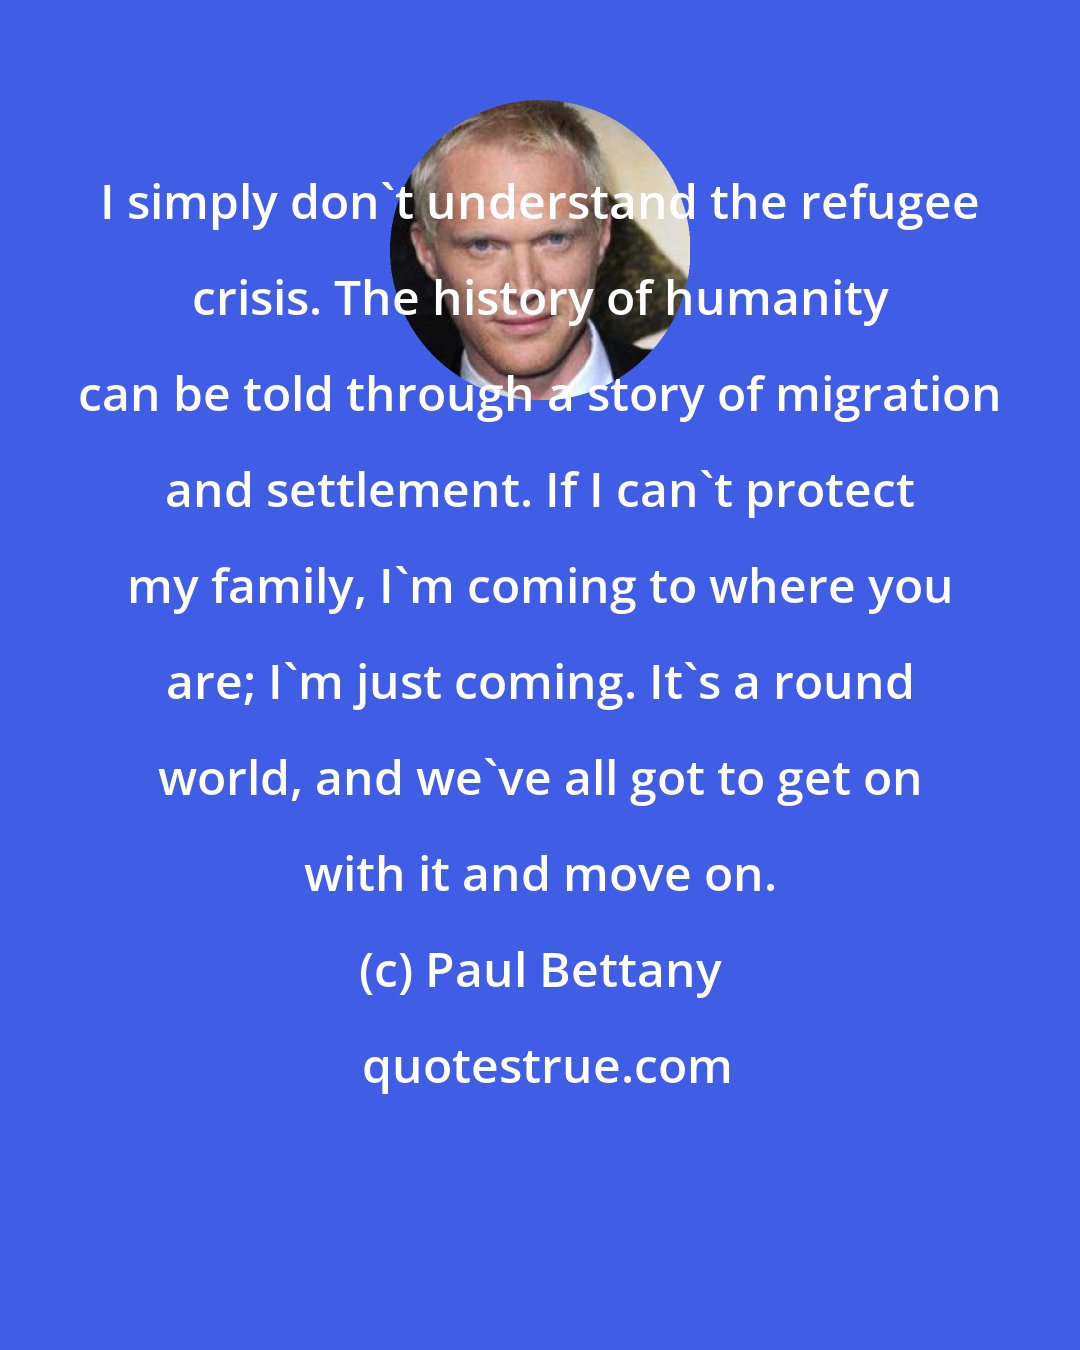 Paul Bettany: I simply don't understand the refugee crisis. The history of humanity can be told through a story of migration and settlement. If I can't protect my family, I'm coming to where you are; I'm just coming. It's a round world, and we've all got to get on with it and move on.